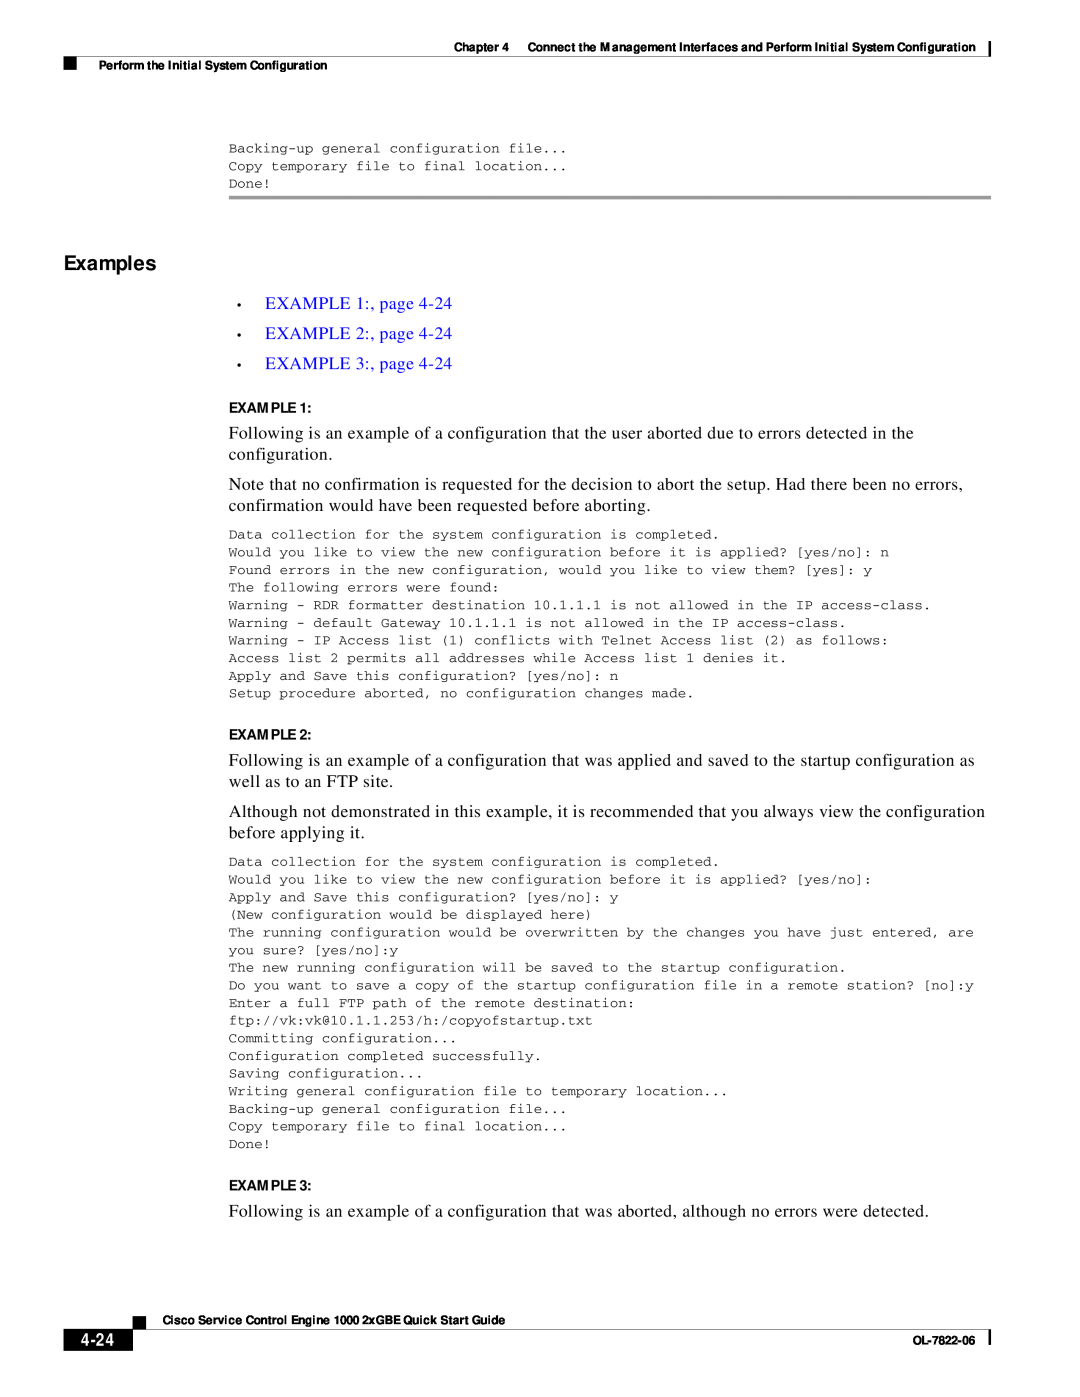 Cisco Systems OL-7822-06 quick start 4-24, Examples, EXAMPLE 1, page EXAMPLE 2, page EXAMPLE 3, page 